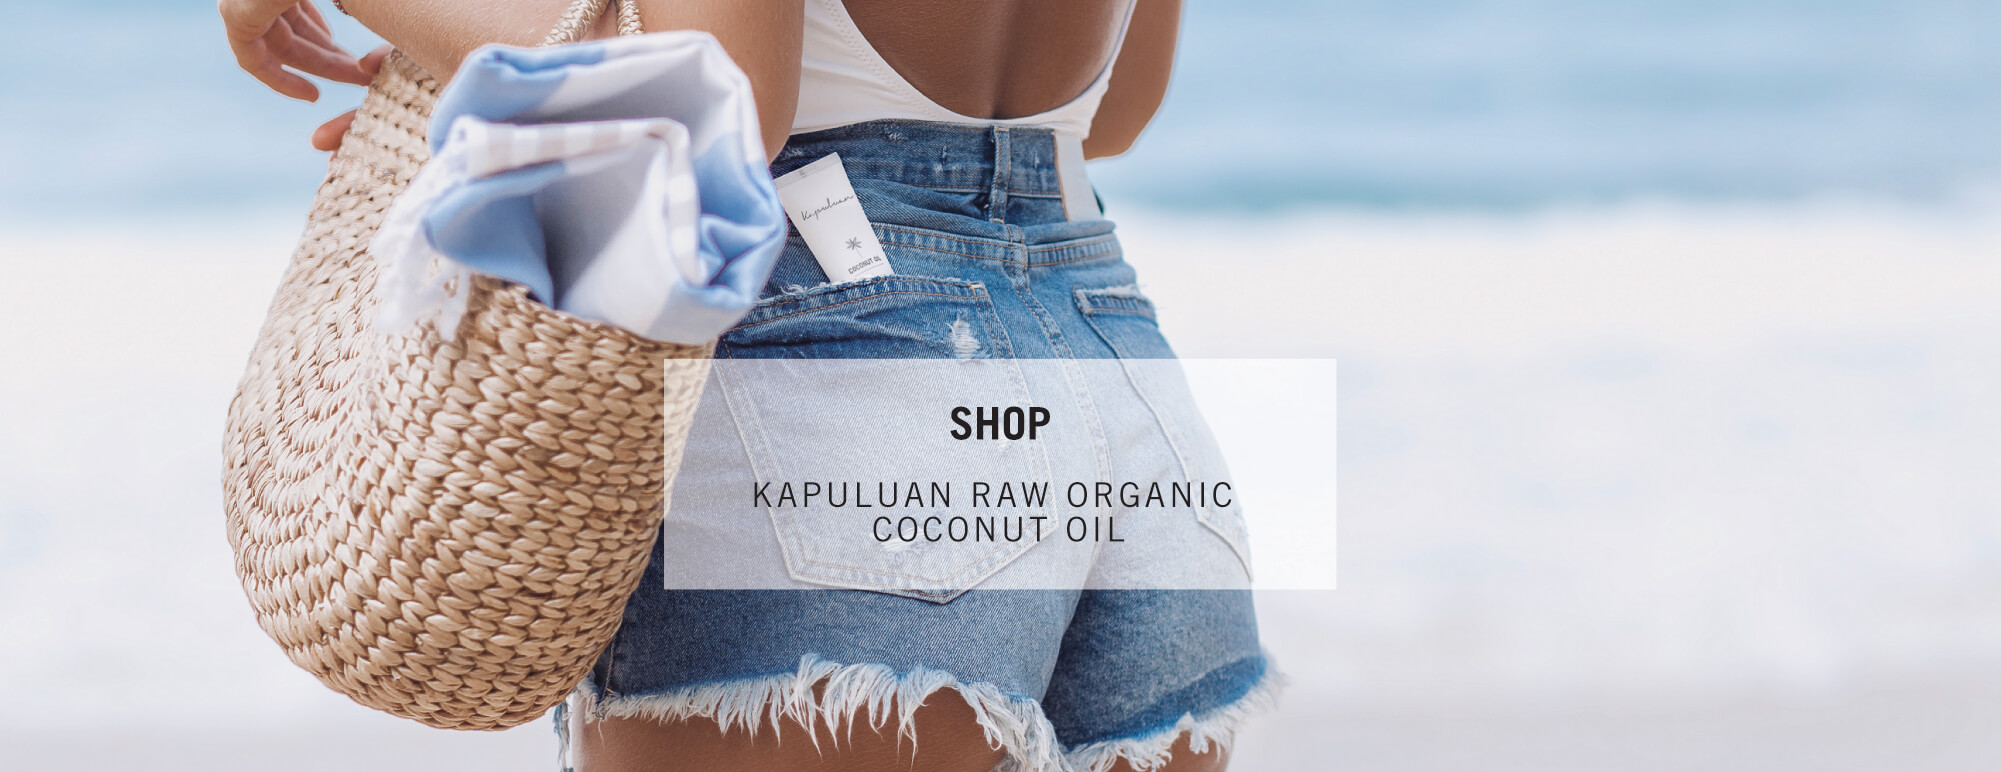 A person holding a coconut straw tote bag with a partial view of a kapuluan raw organic coconut oil product, dressed in denim shorts and standing against a blurred beach backdrop.